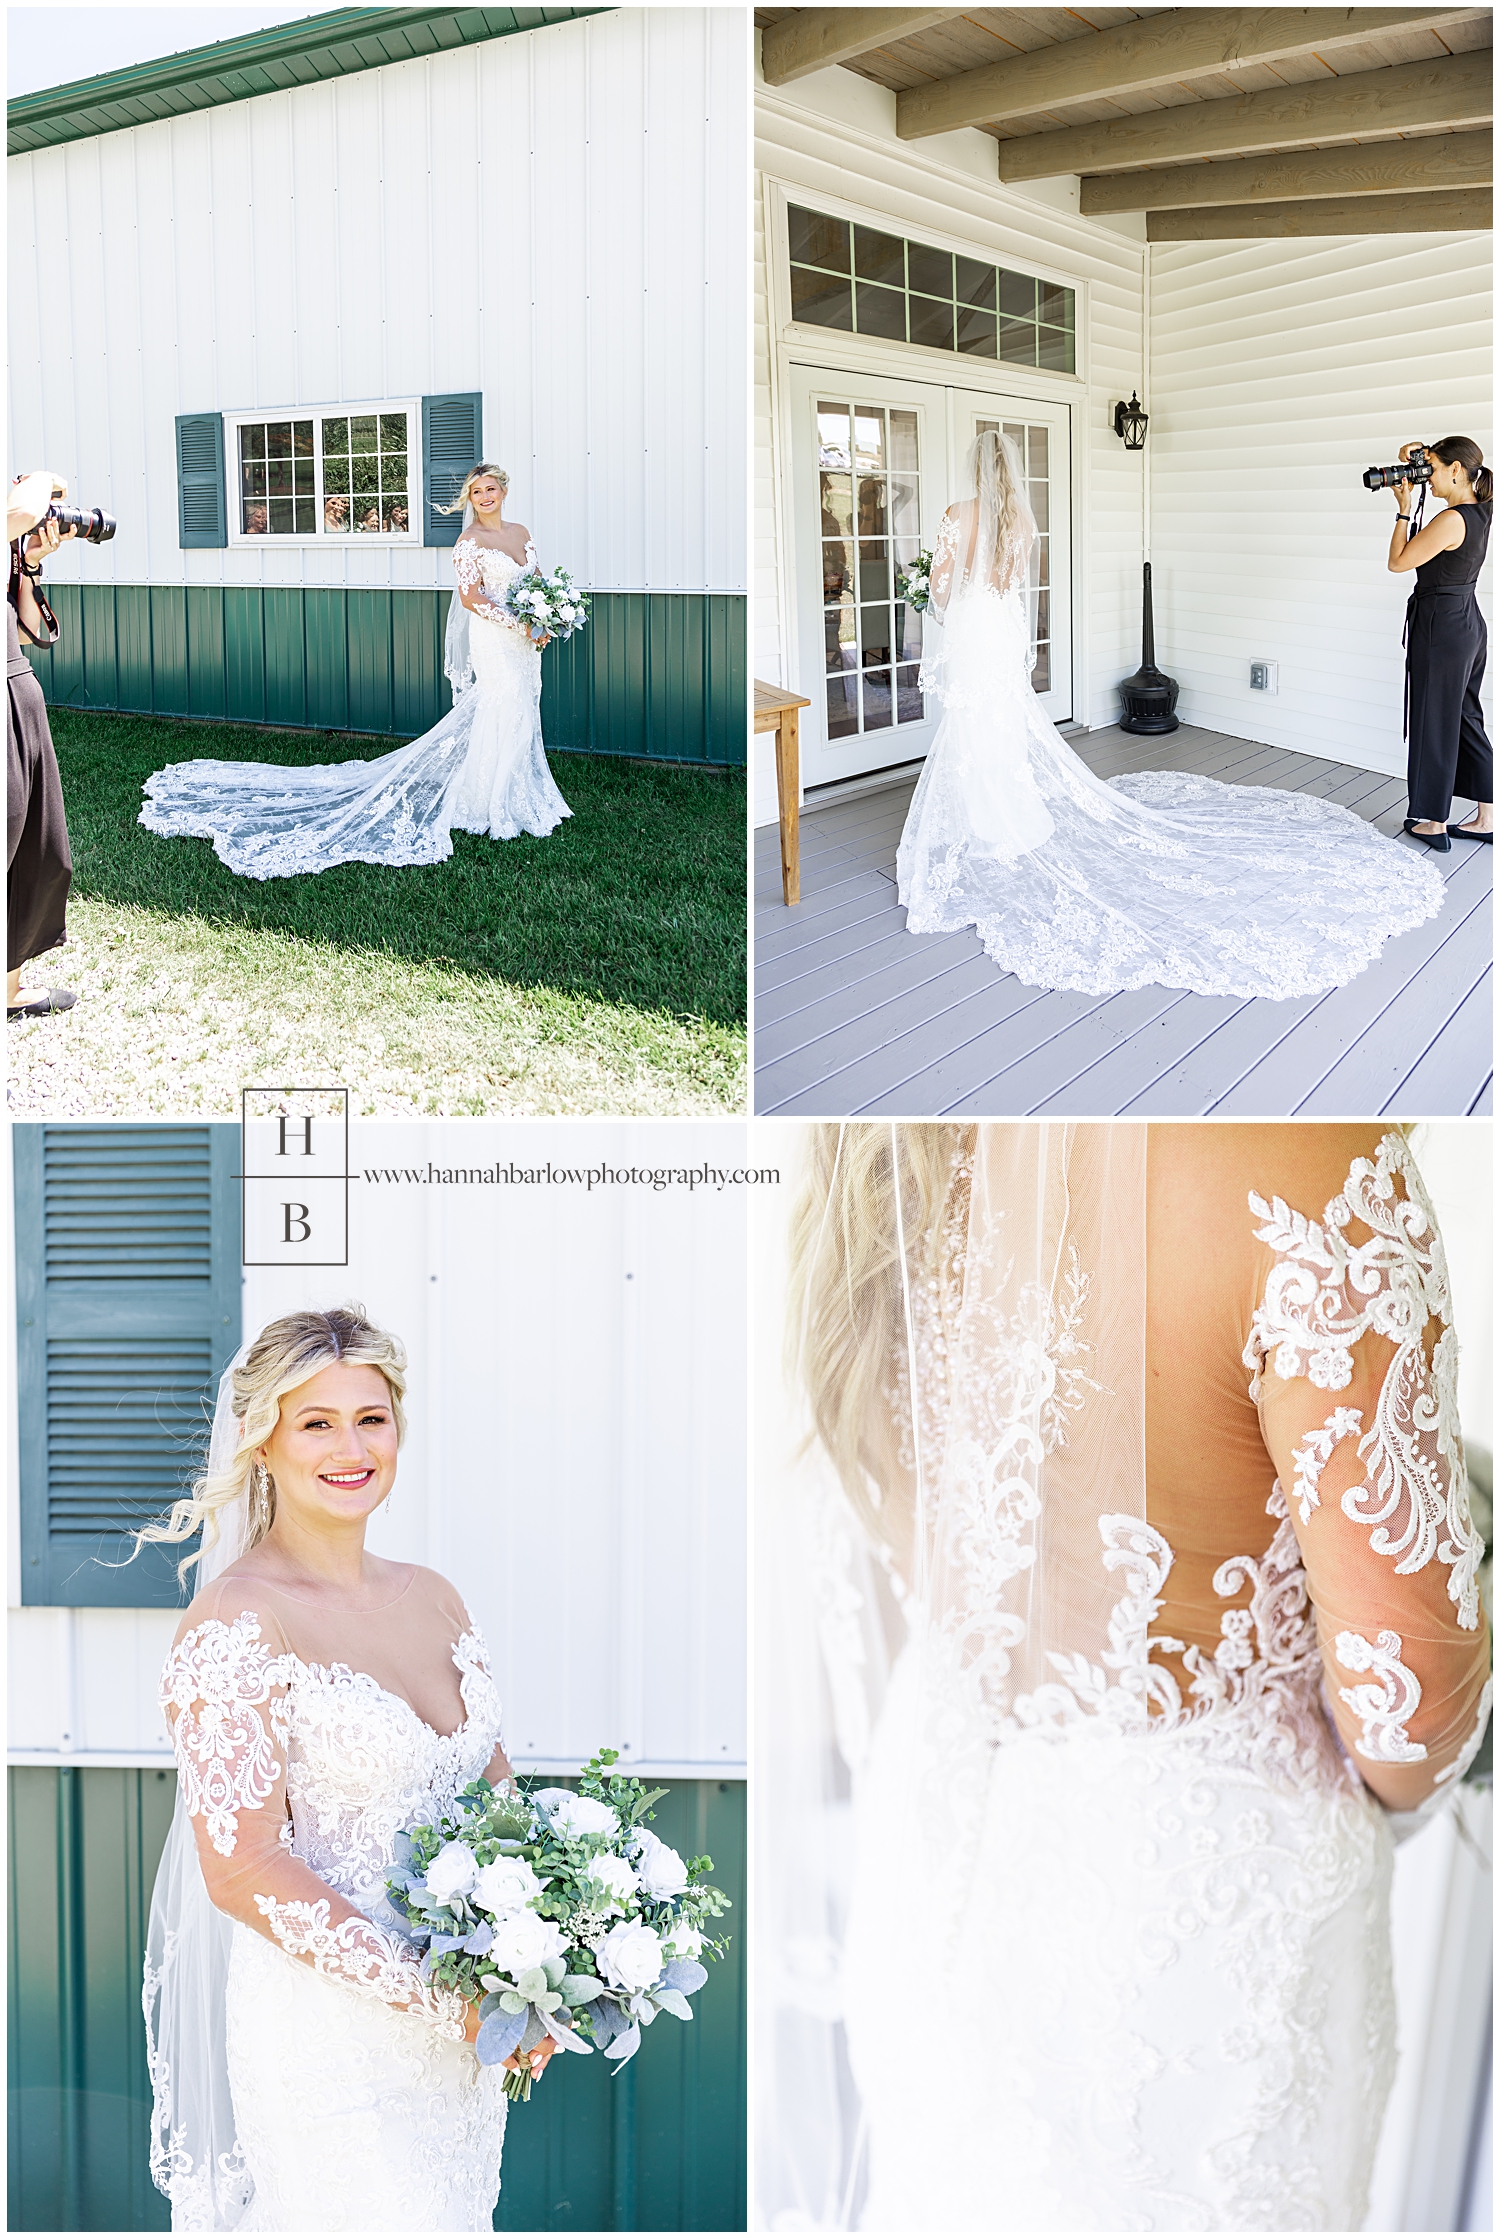 Wedding photographer takes photos of bride by white barn wall